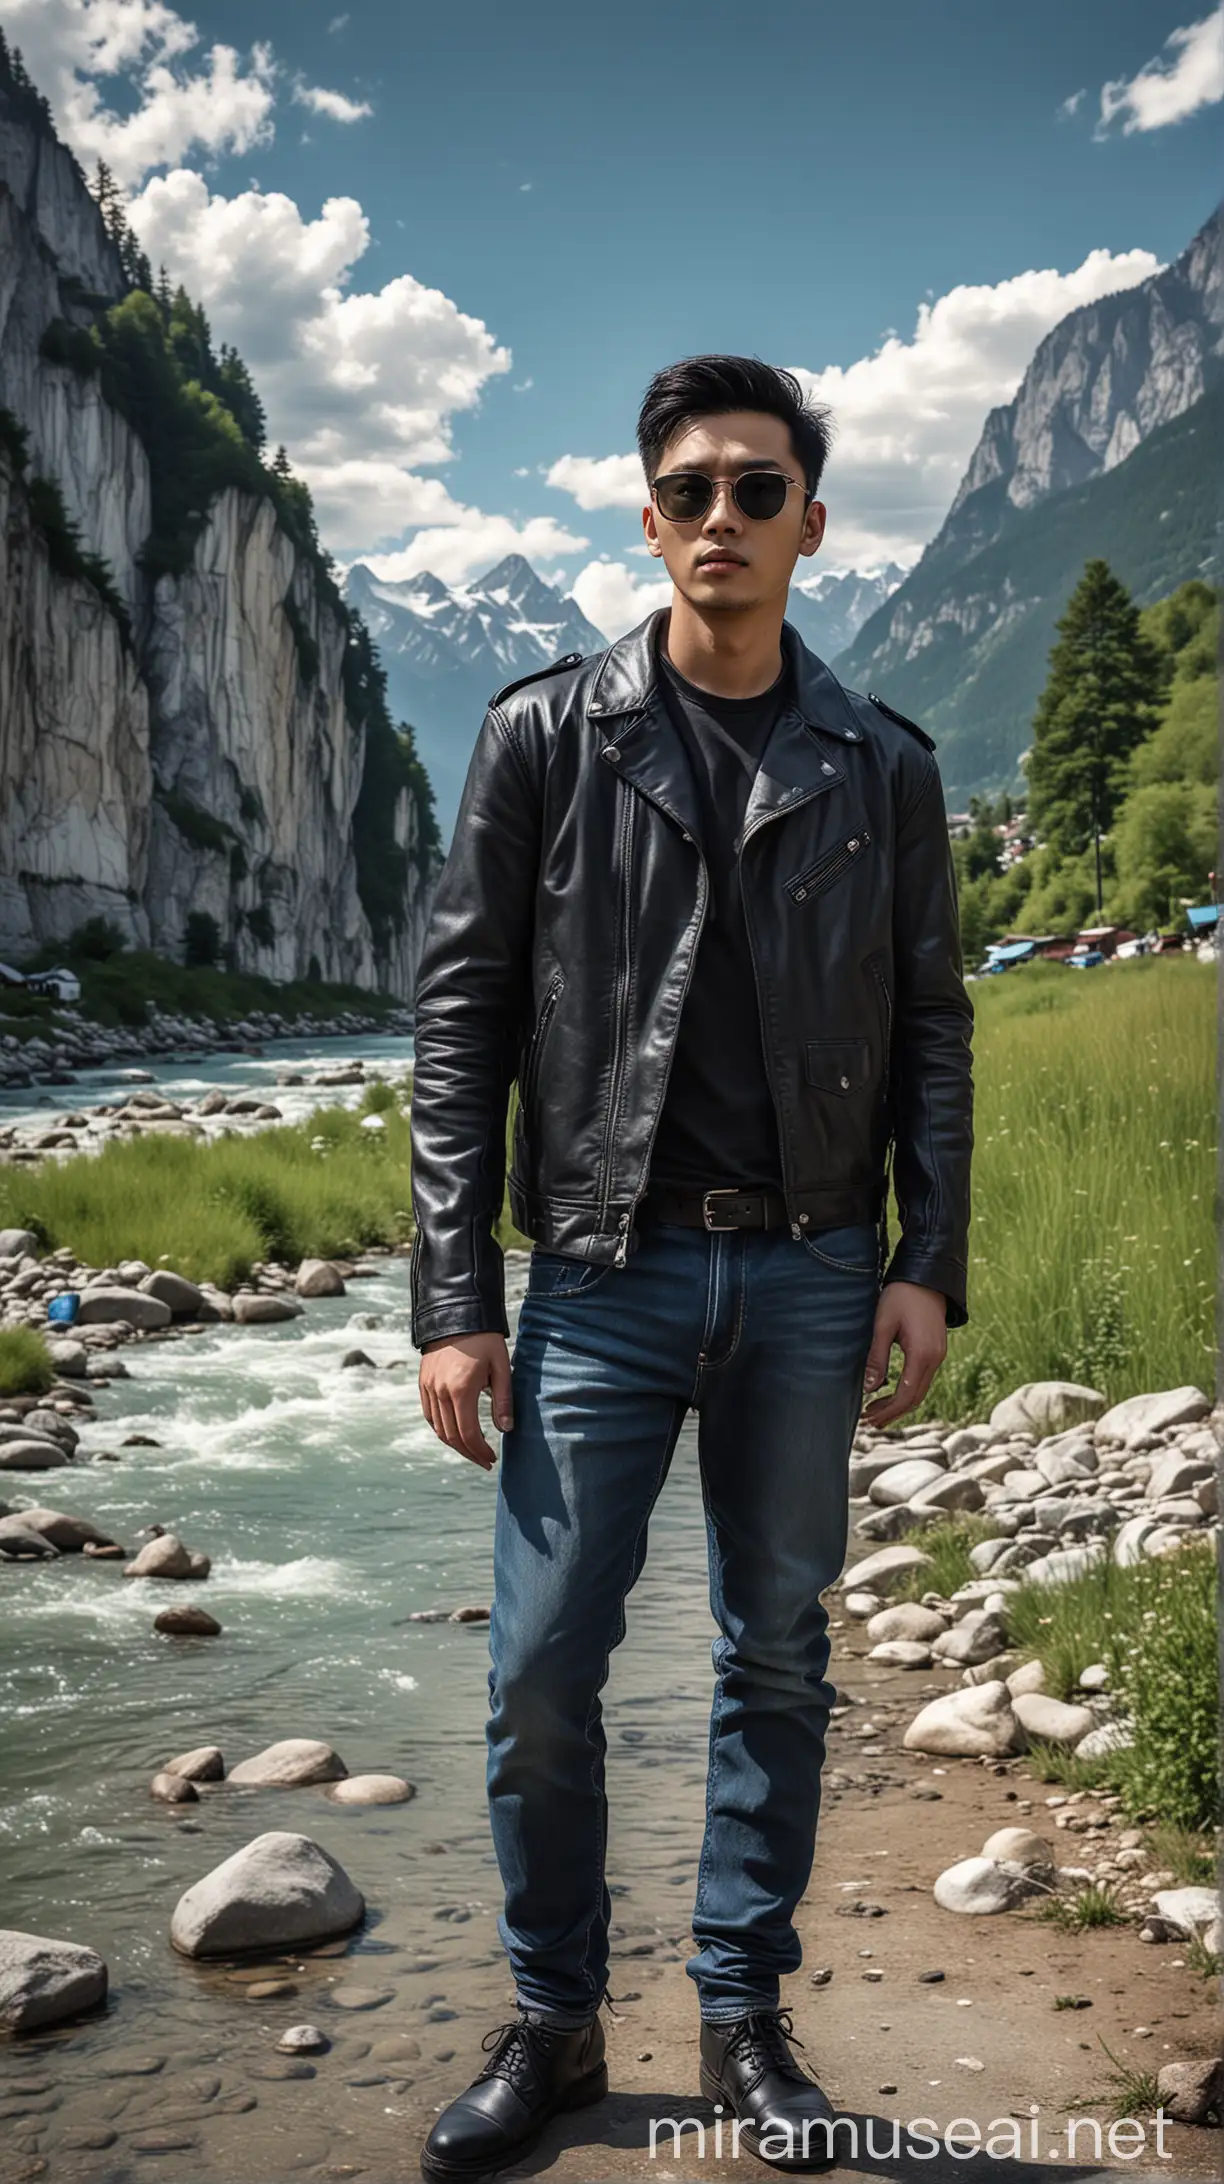 Stylish Korean Man Walking with Panther in the Majestic Swiss Alps